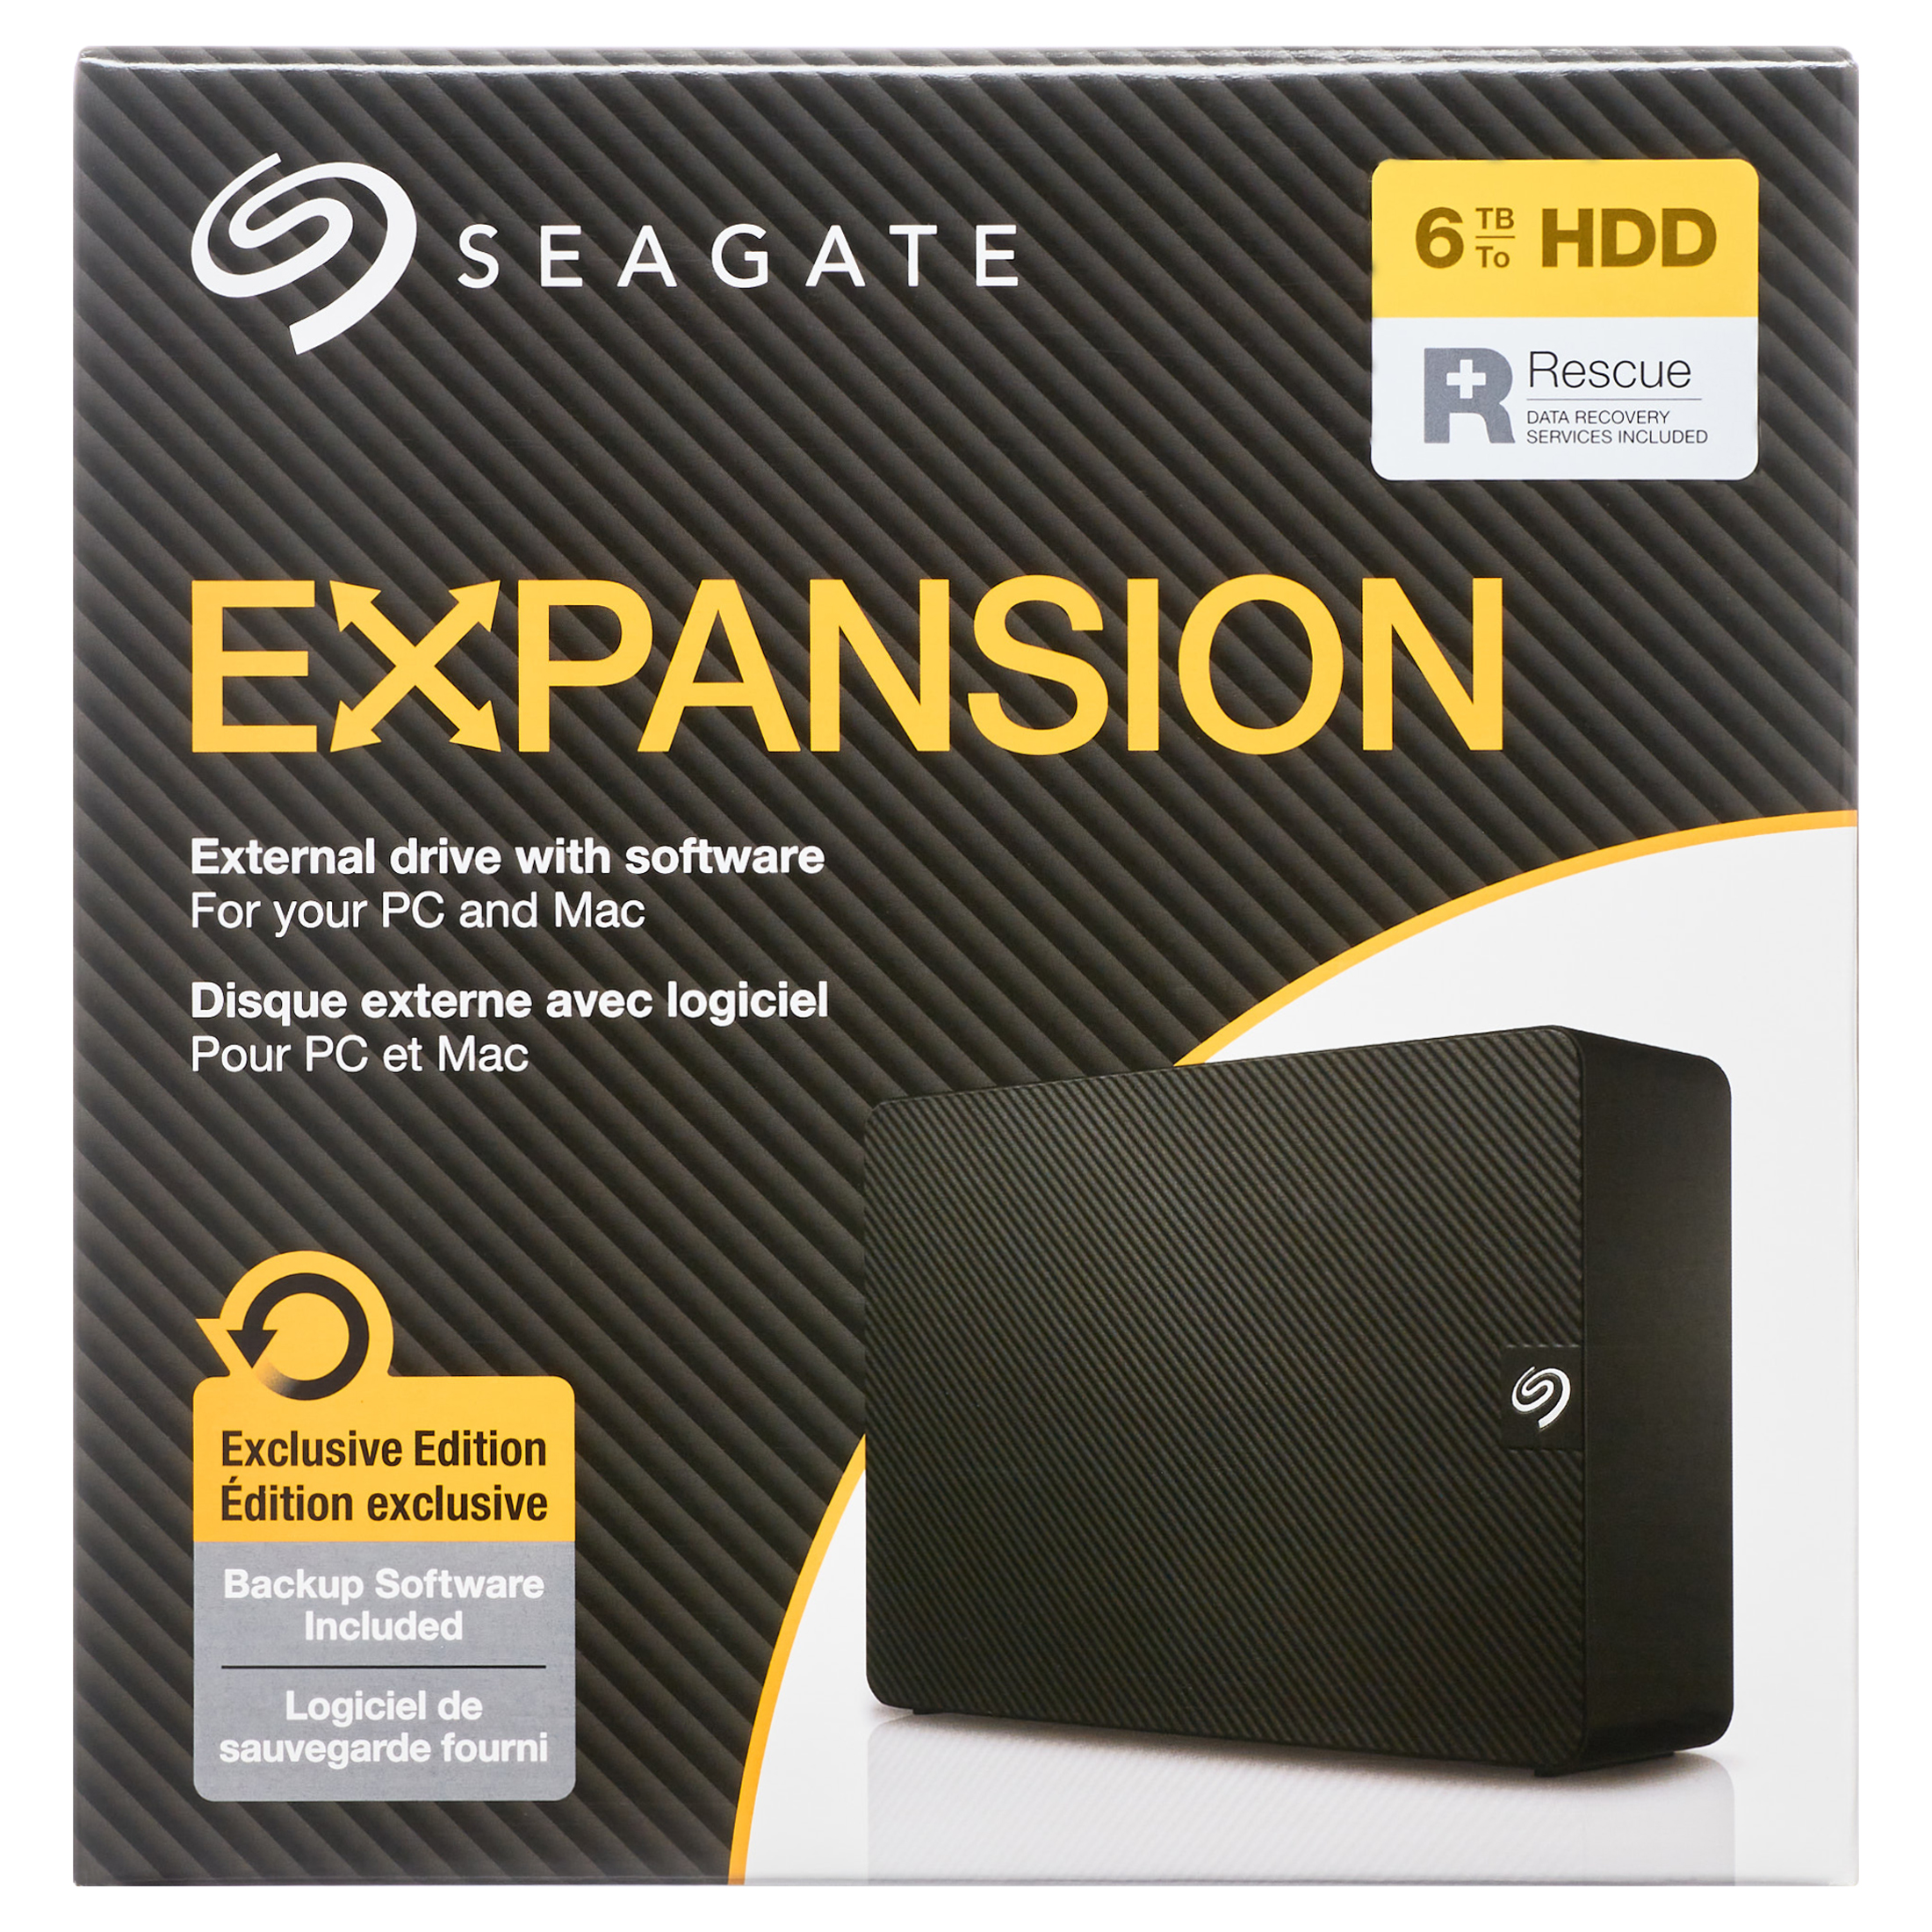 Seagate ExpansionPLUS 6TB External Hard Drive HDD - USB 3.0, with Rescue Data Recovery Services and Toolkit Backup Software (STKR6000400) - image 1 of 12